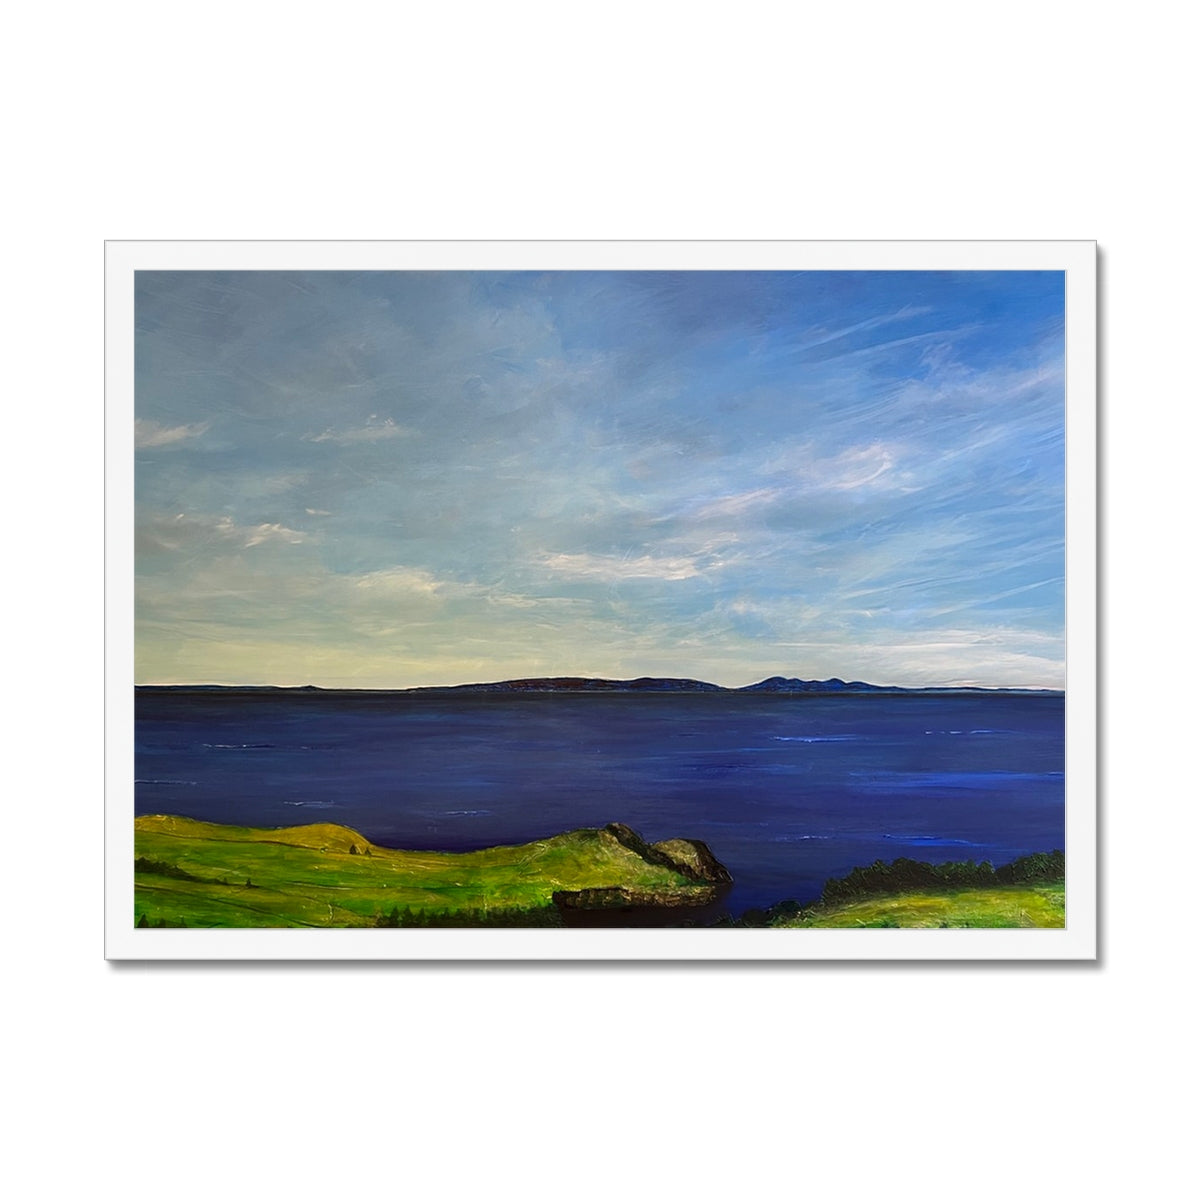 From Ireland To Scotland Painting | Framed Prints From Scotland-Framed Prints-World Art Gallery-A2 Landscape-White Frame-Paintings, Prints, Homeware, Art Gifts From Scotland By Scottish Artist Kevin Hunter